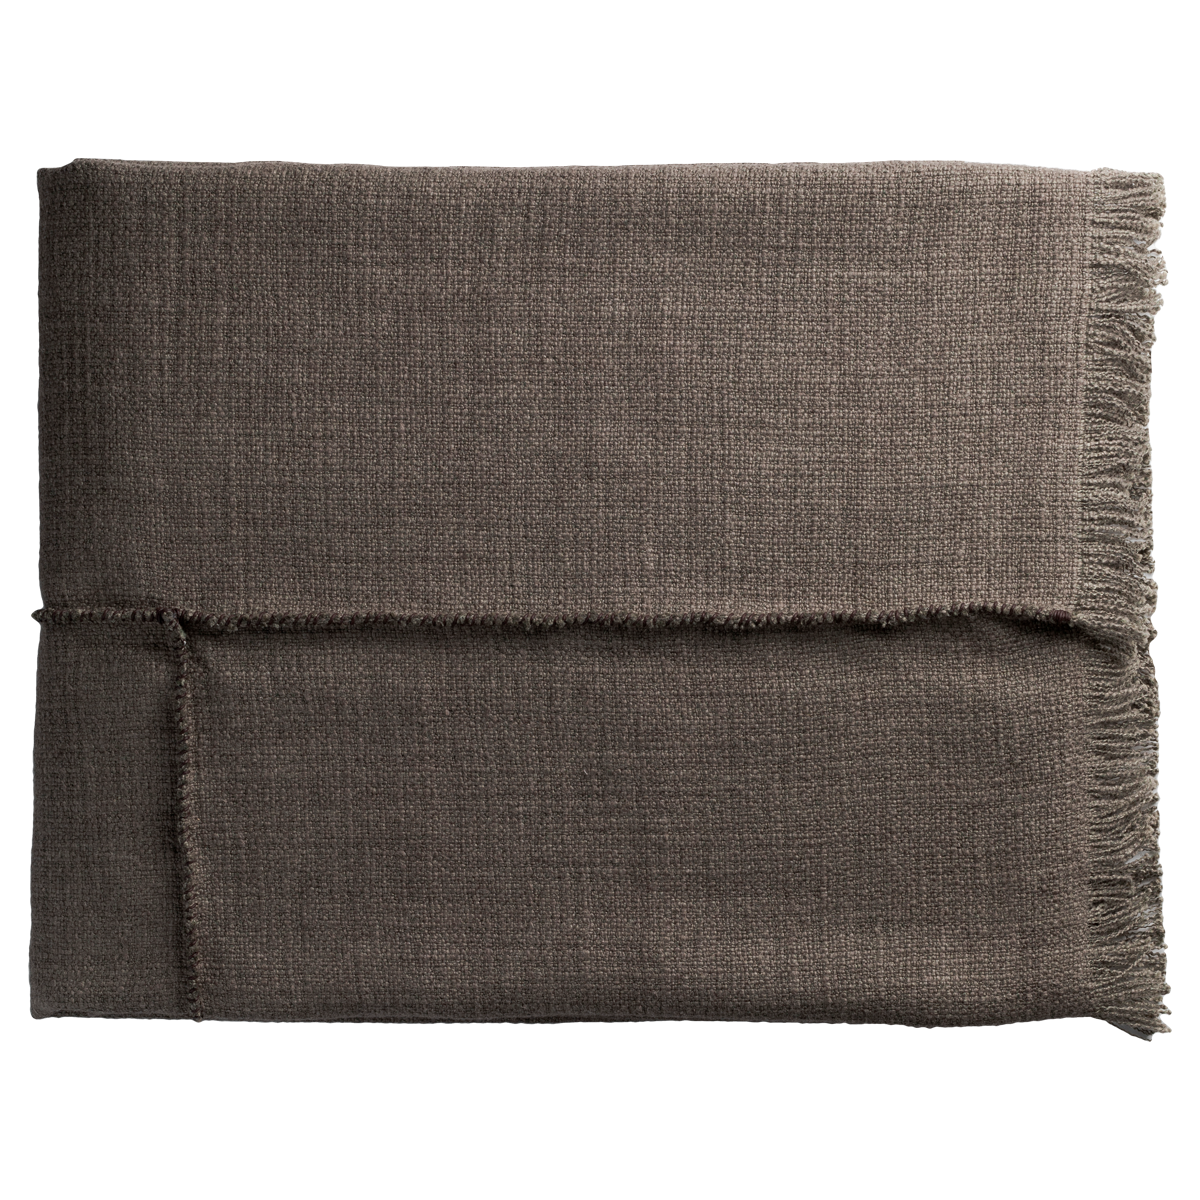 WARRIOR CLOTH PANELLED THROW WITH FRINGE & CORD DETAIL - LAIR